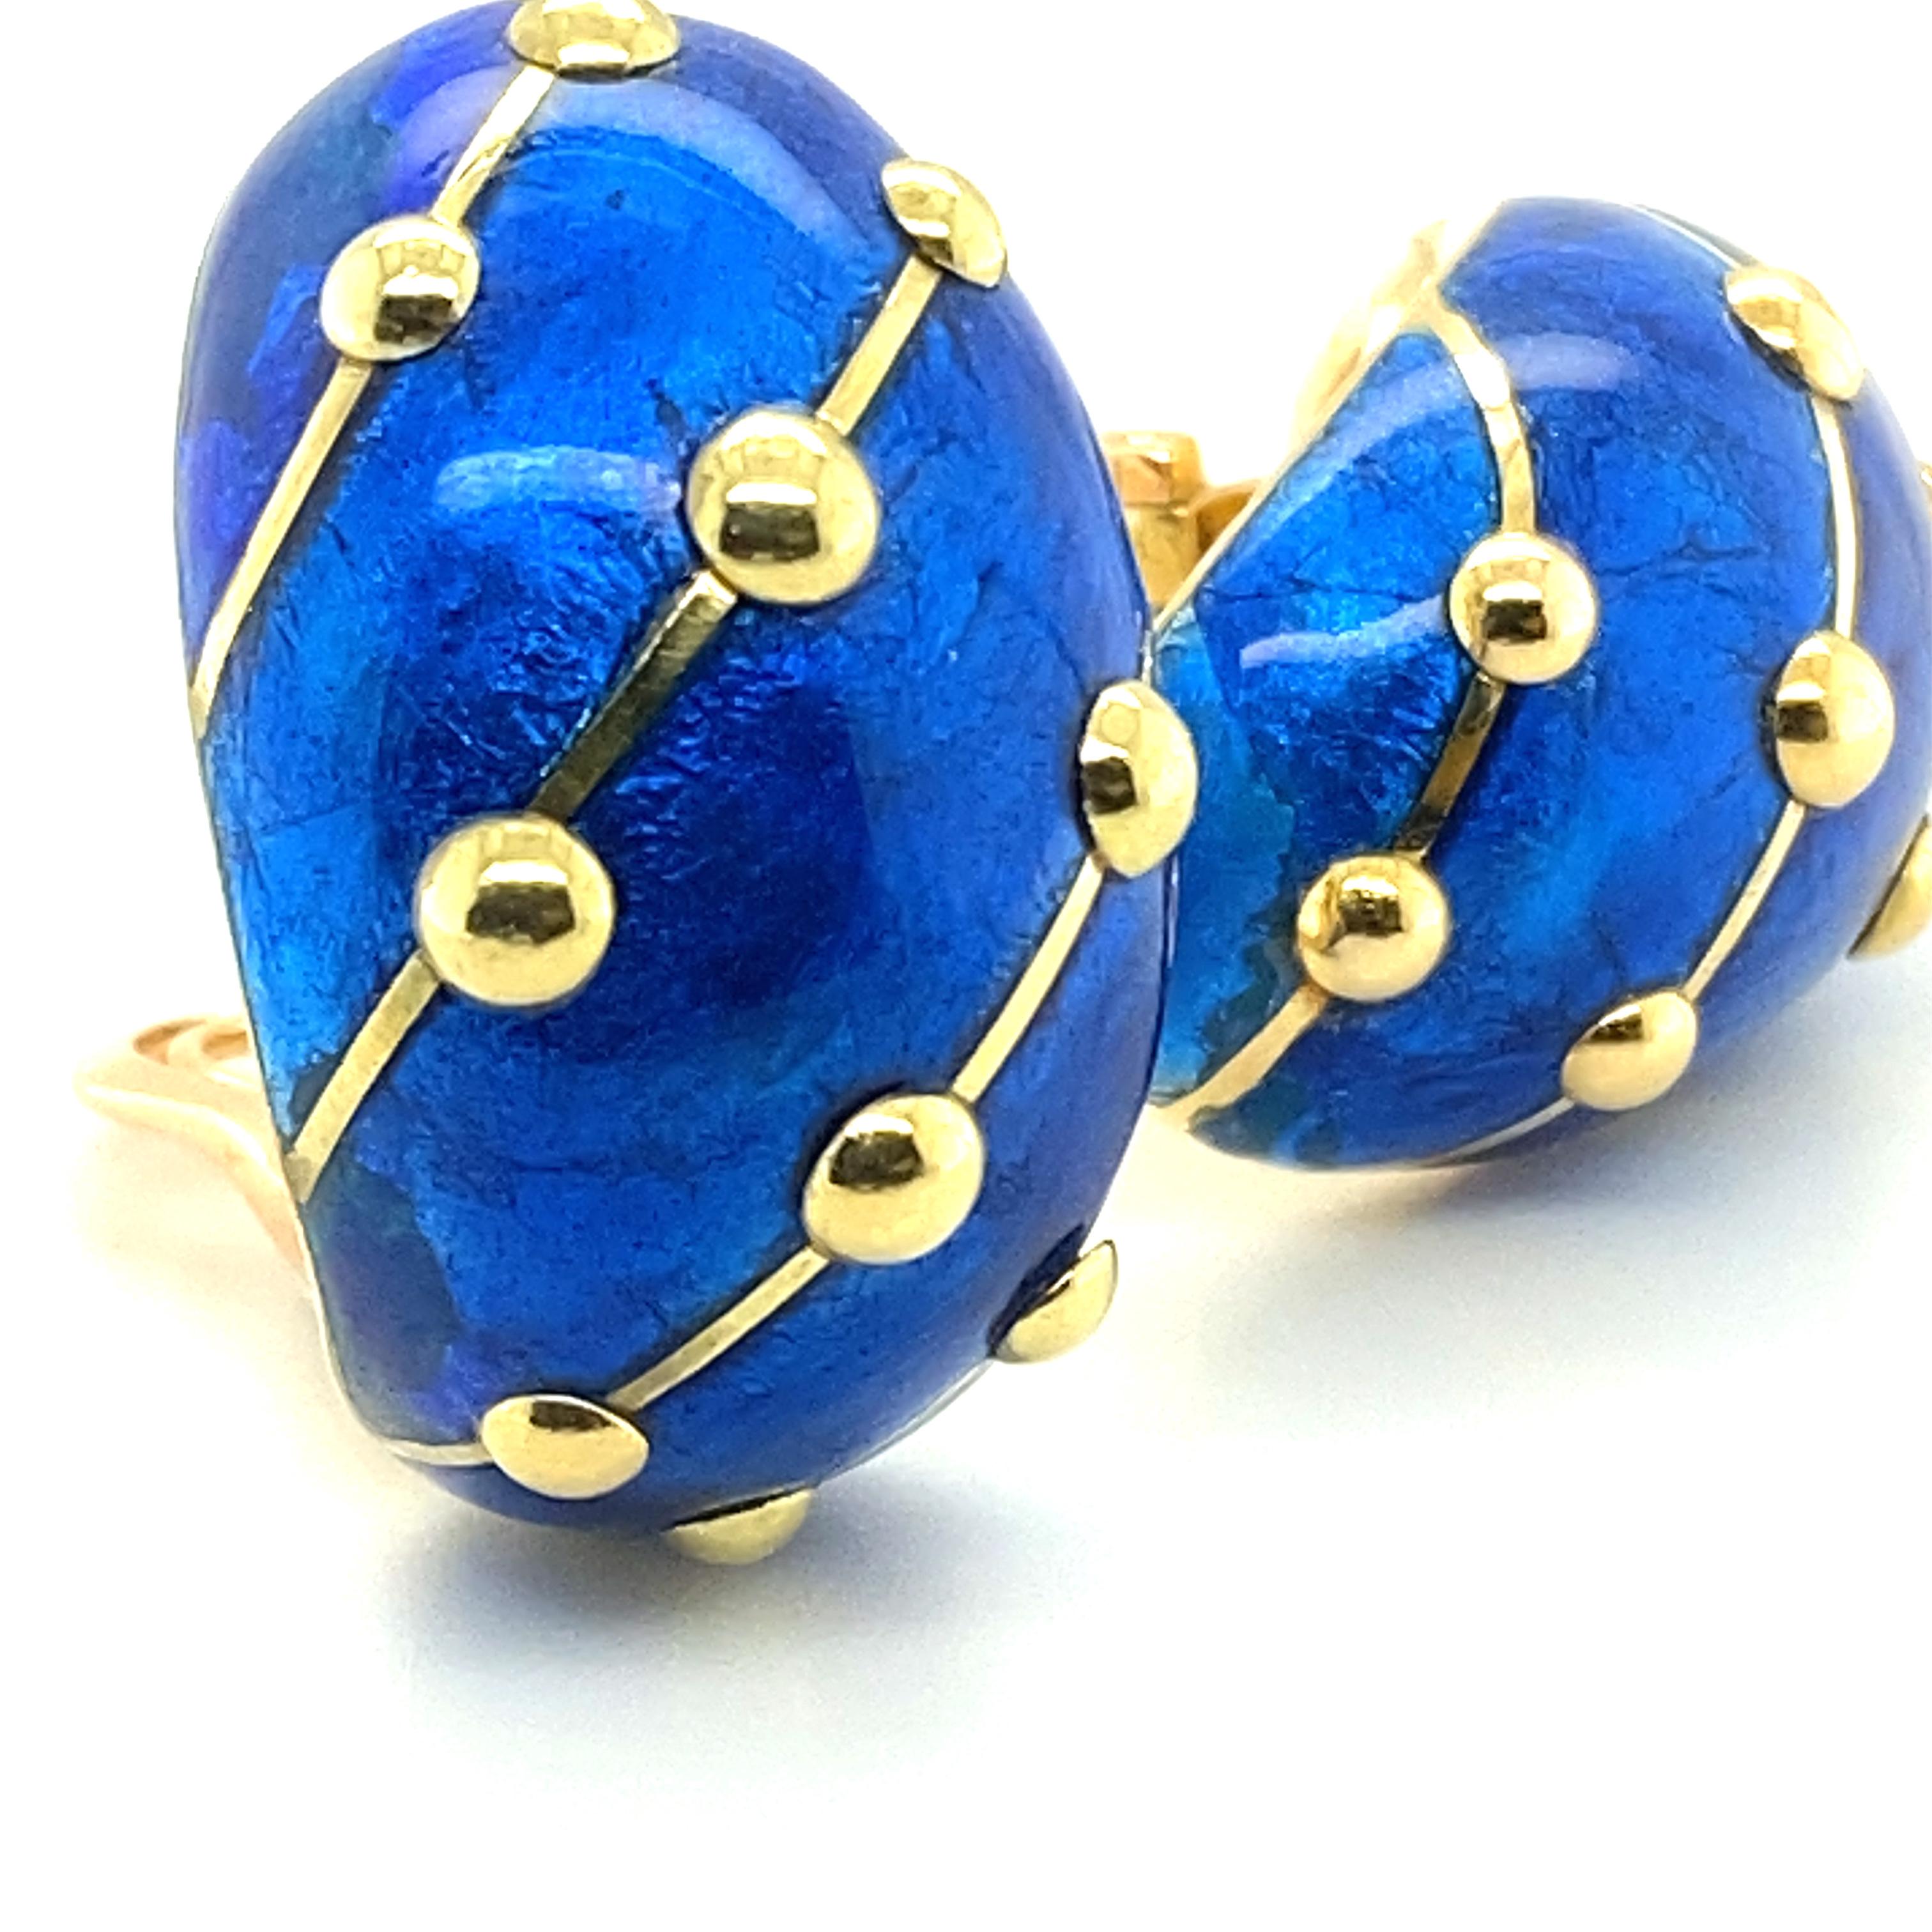 Modern Pair of Gold and Blue Paillonné Enamel 'Banana' Earrings by Jean Schlumberger